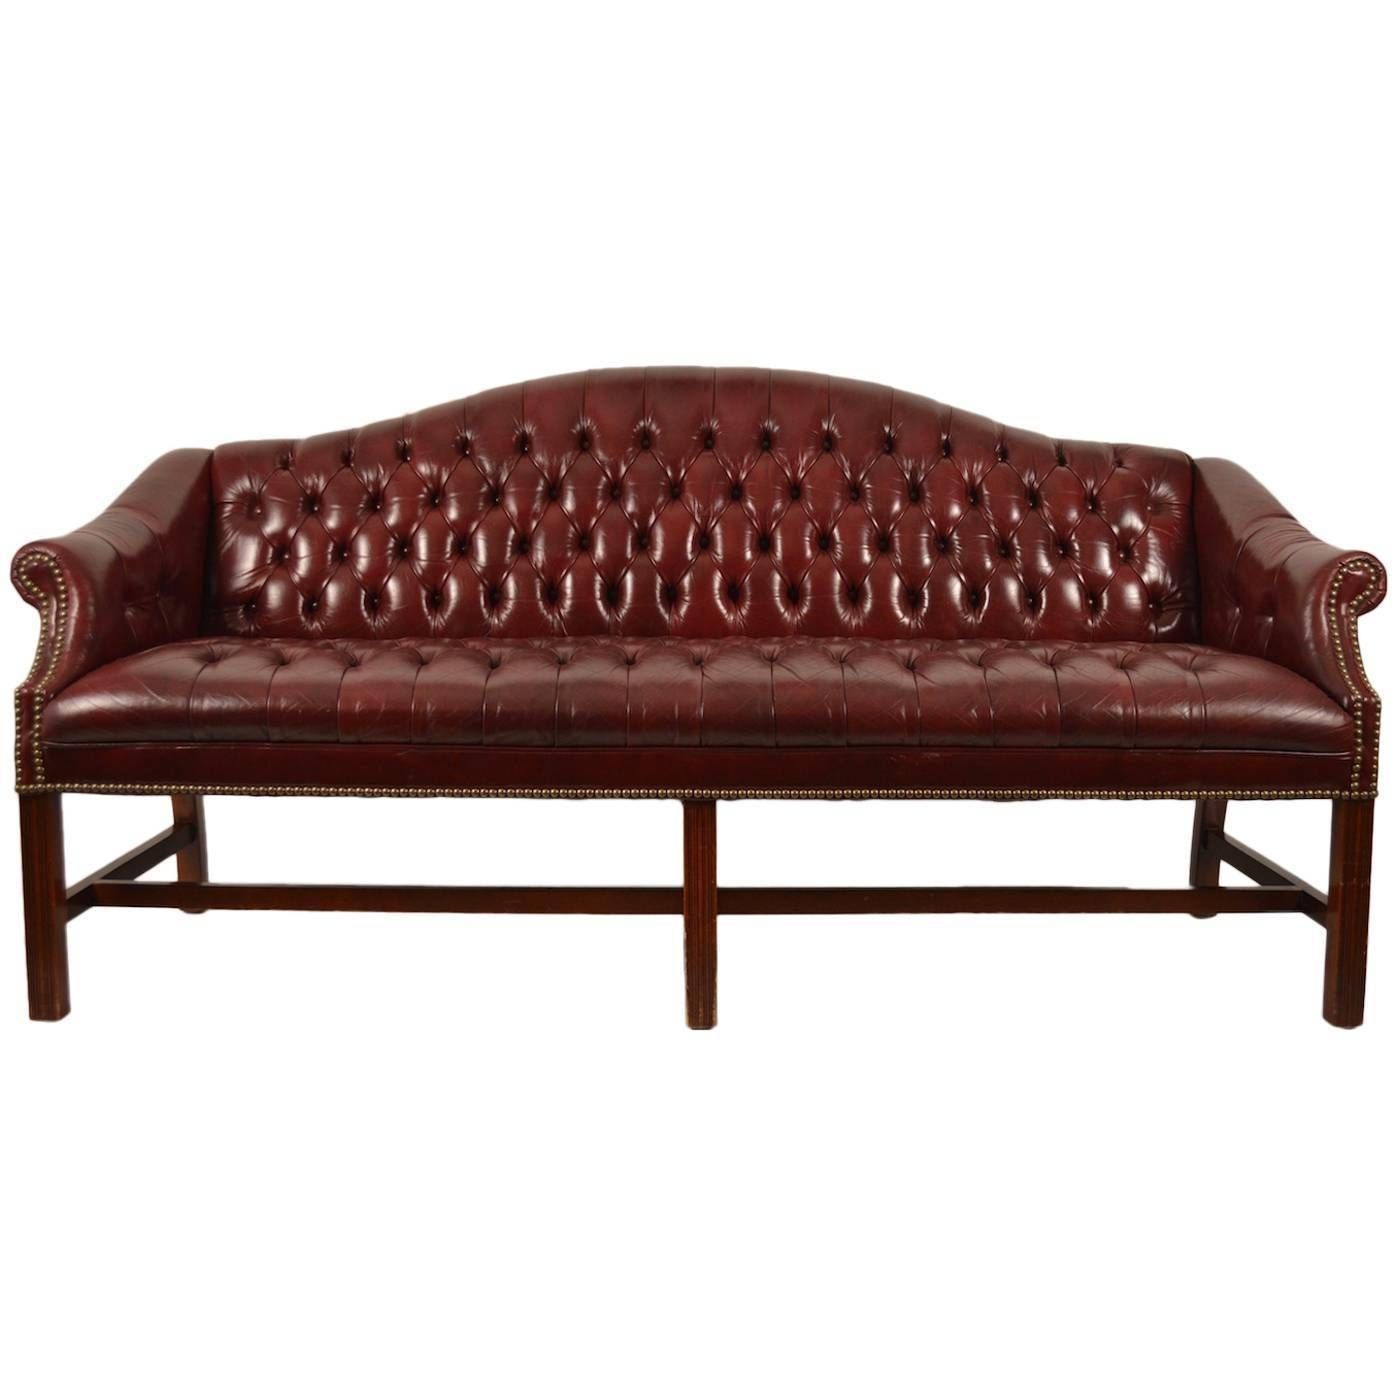 Burgundy Leather Chippendale Camelback Sofa At 1stdibs With Camelback Leather Sofas (View 13 of 15)